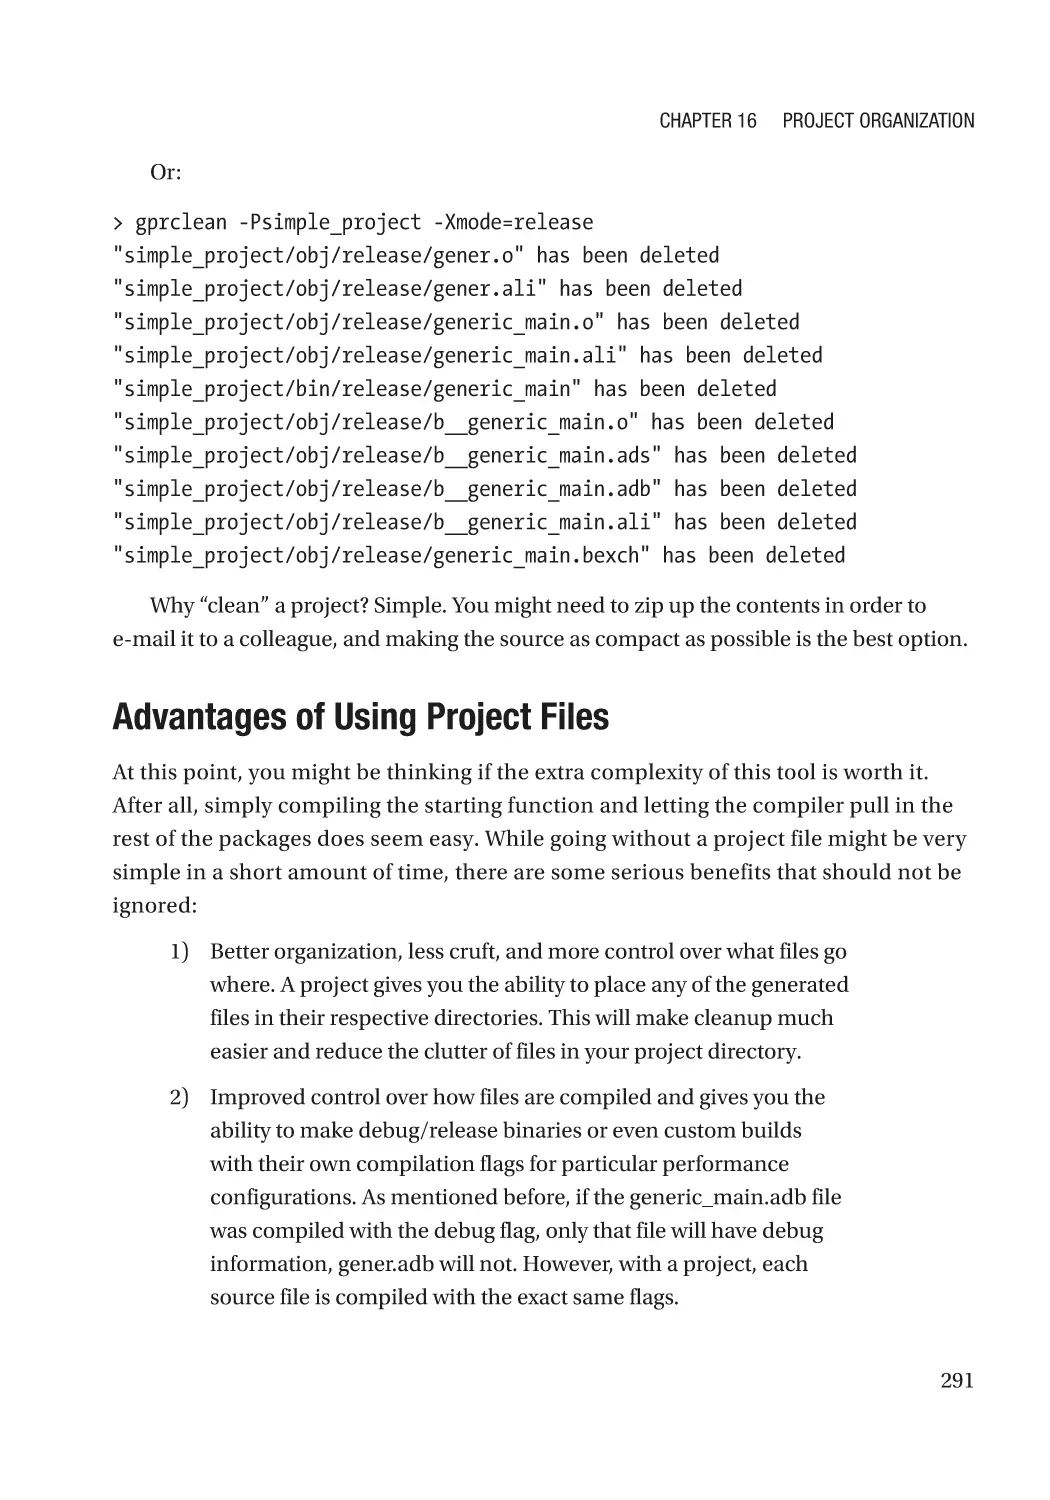 Advantages of Using Project Files